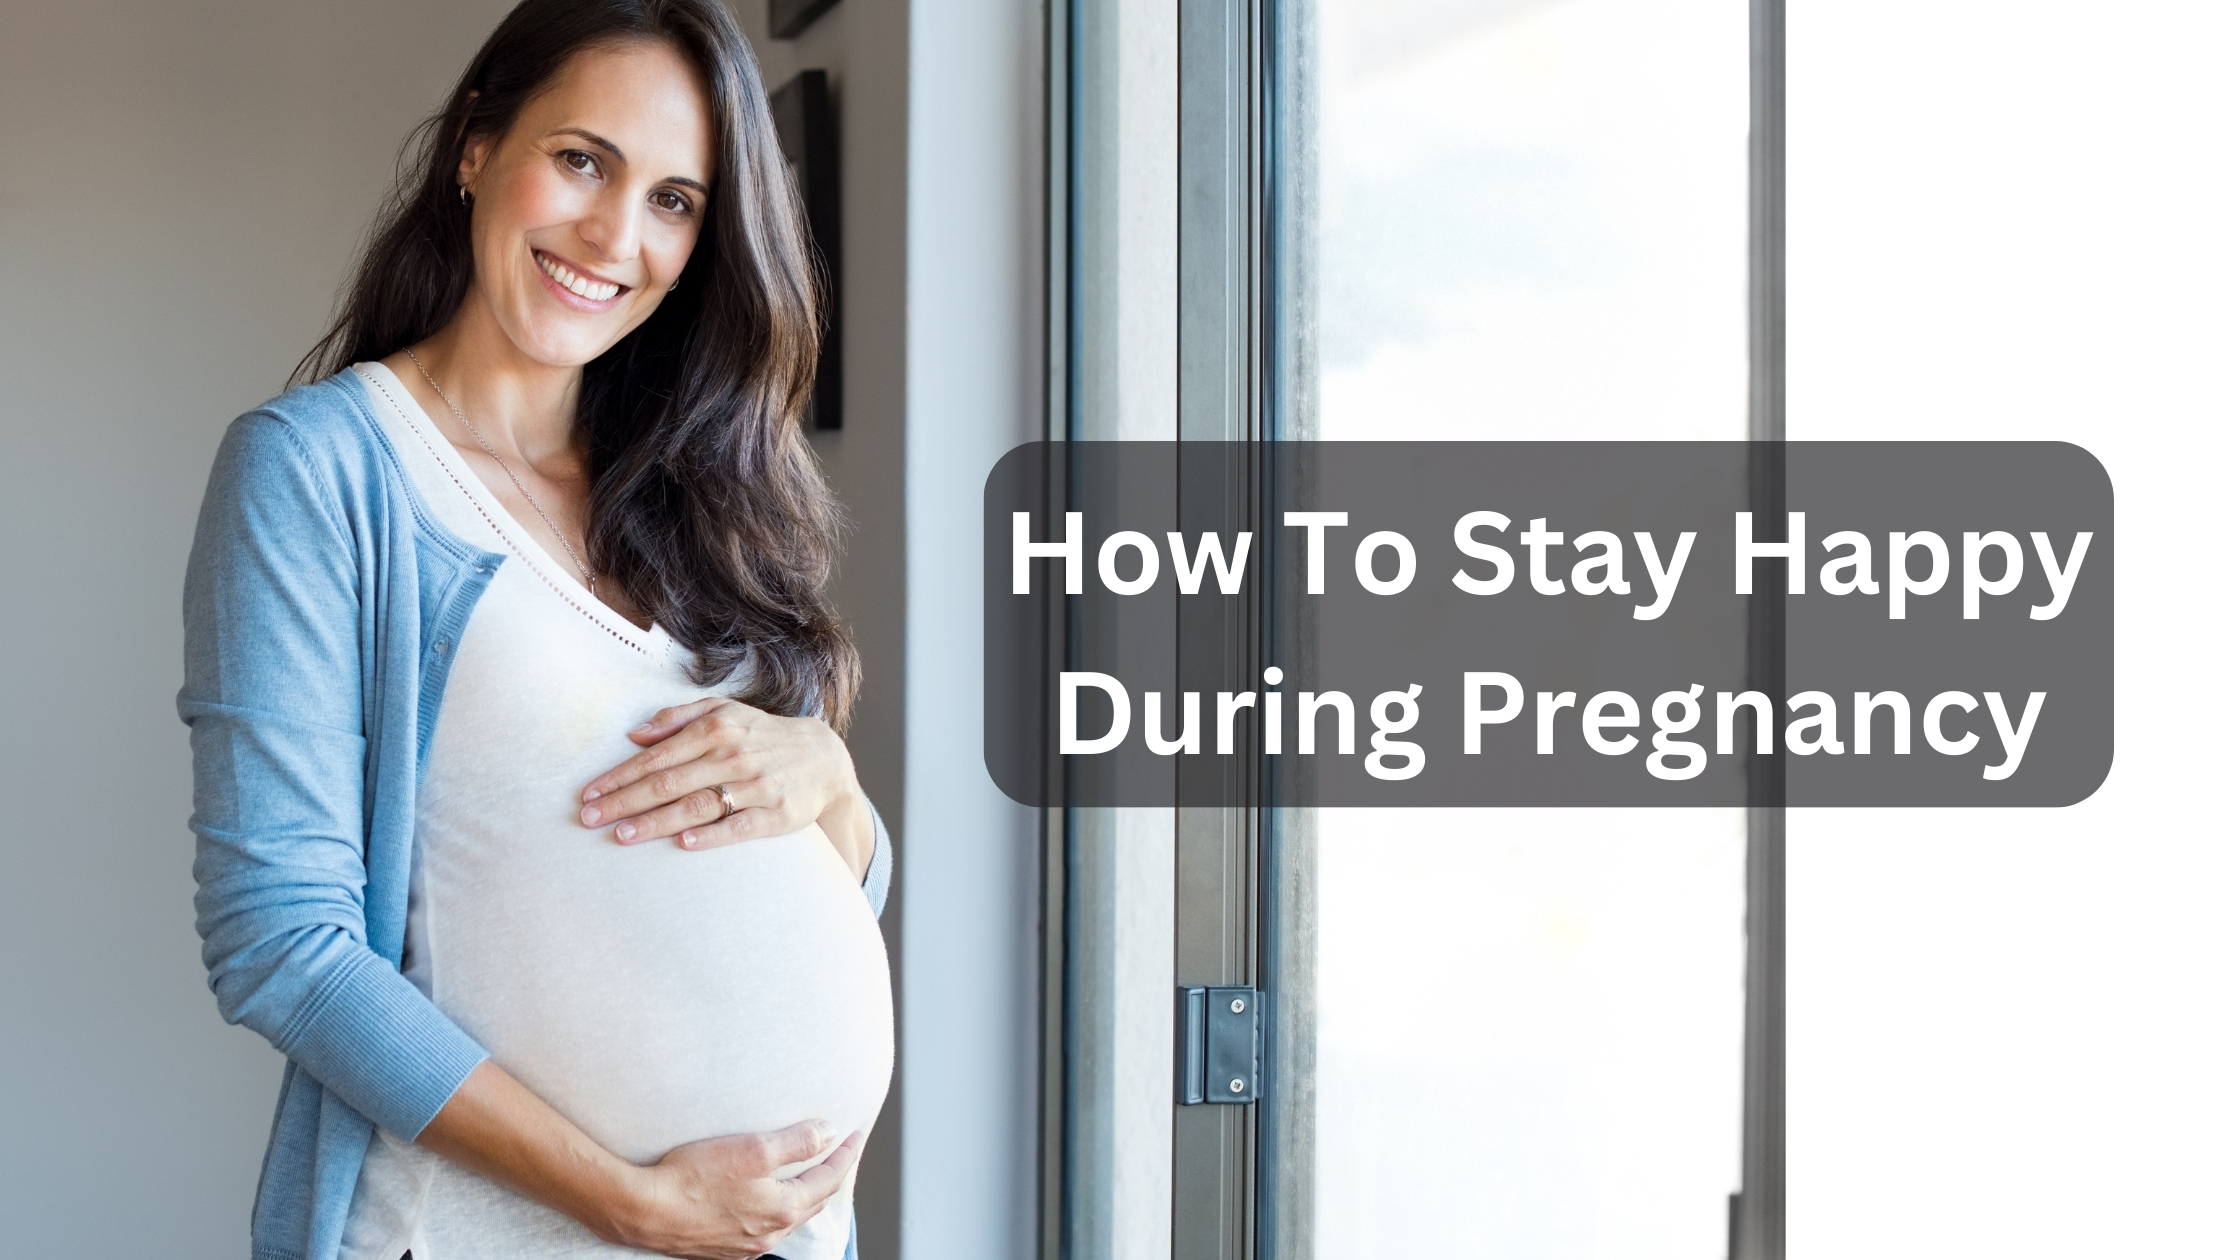 How To Stay Happy During Pregnancy